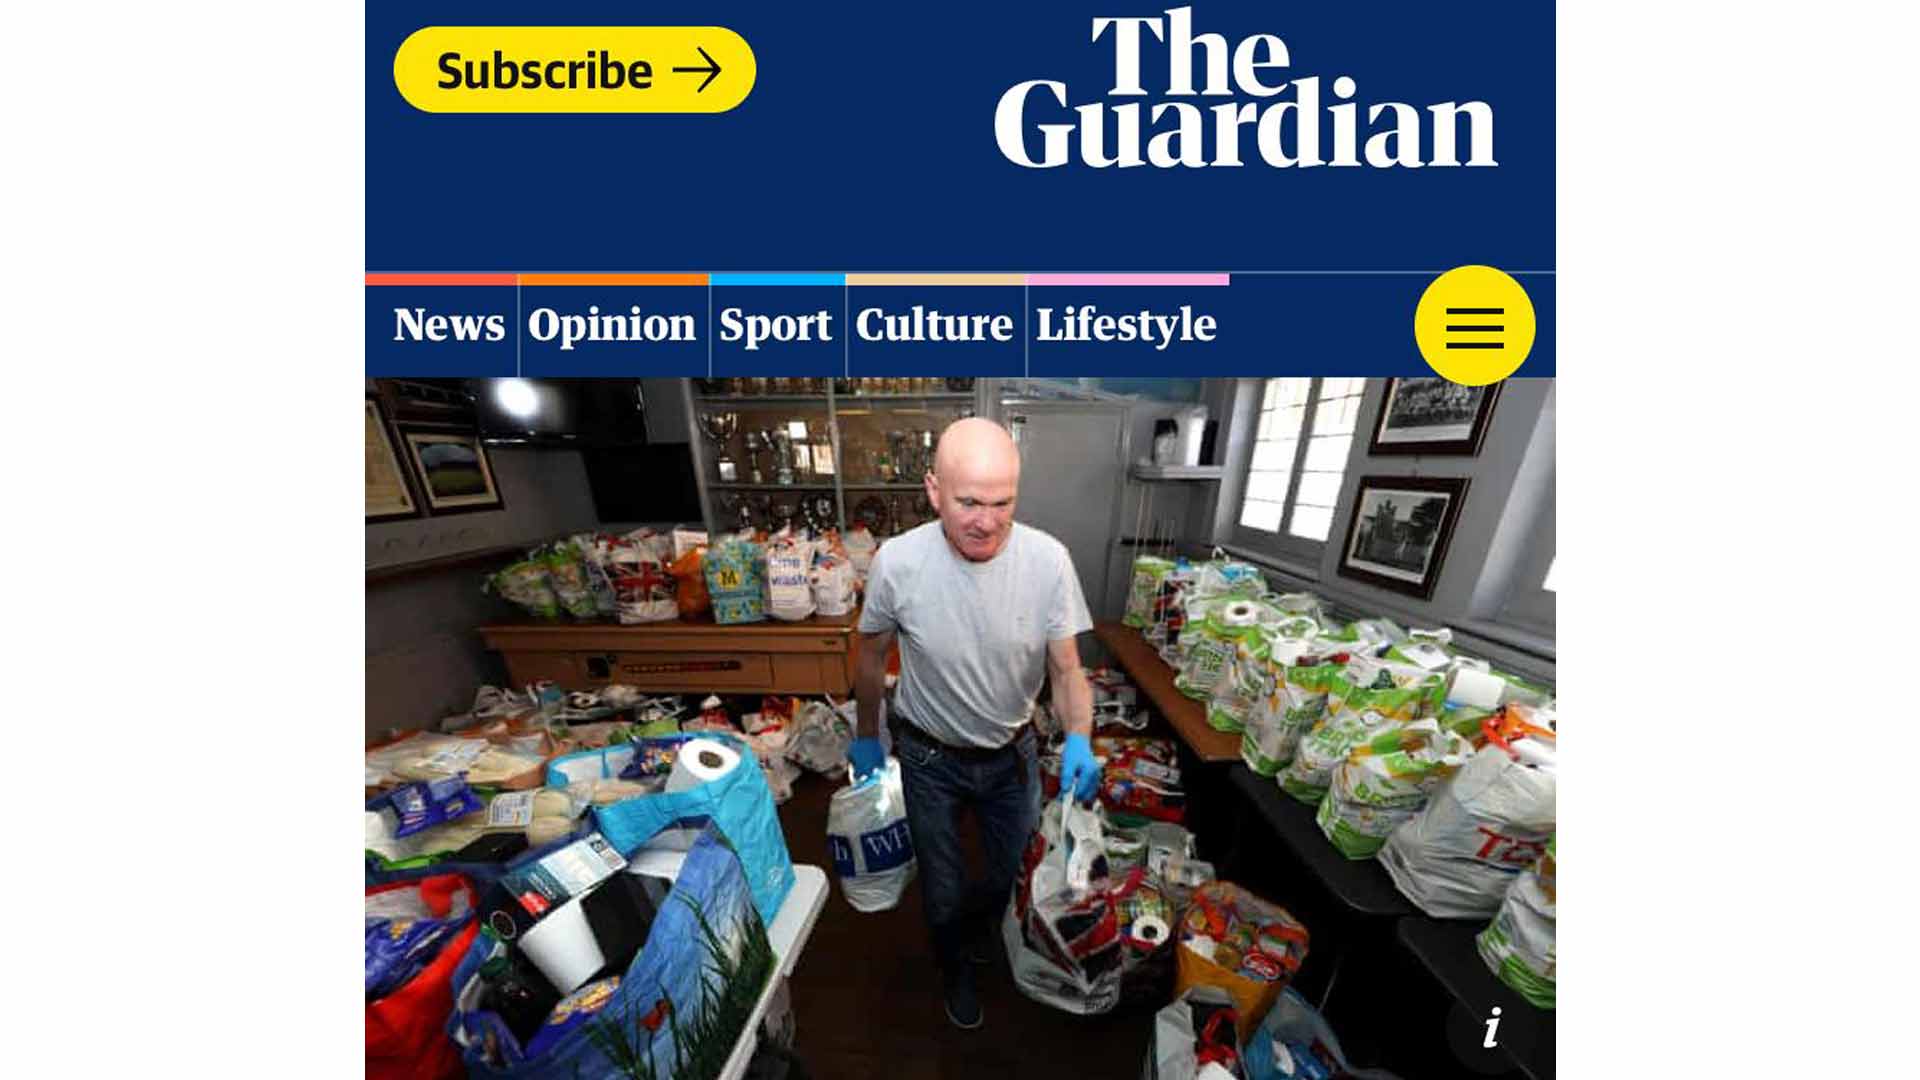 Recognition in The Guardian